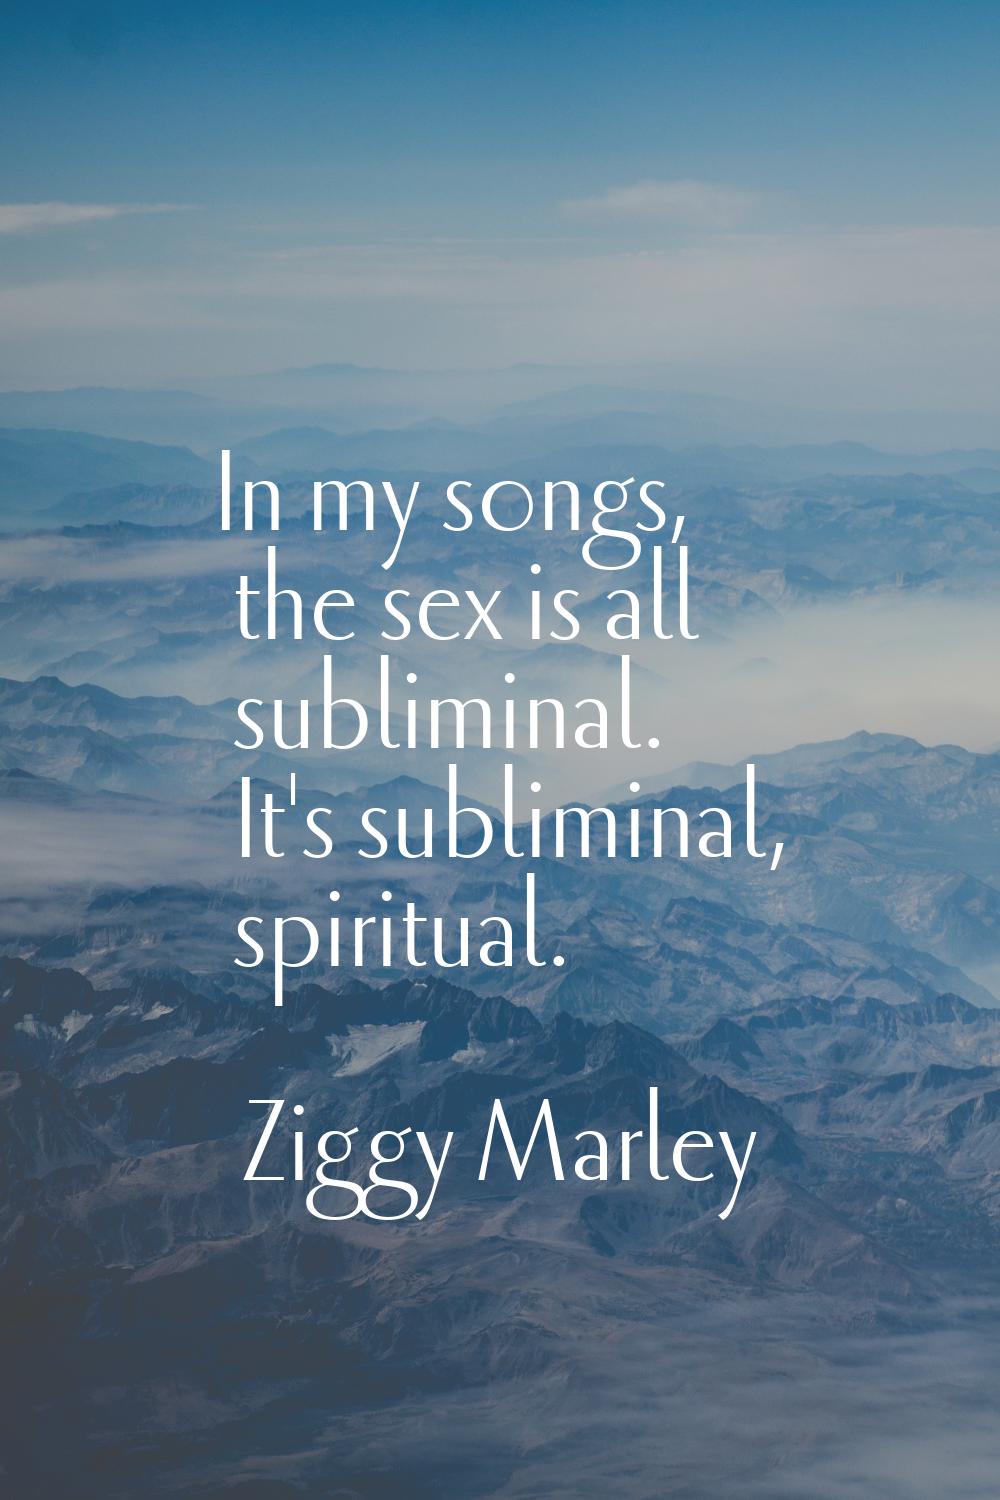 In my songs, the sex is all subliminal. It's subliminal, spiritual.